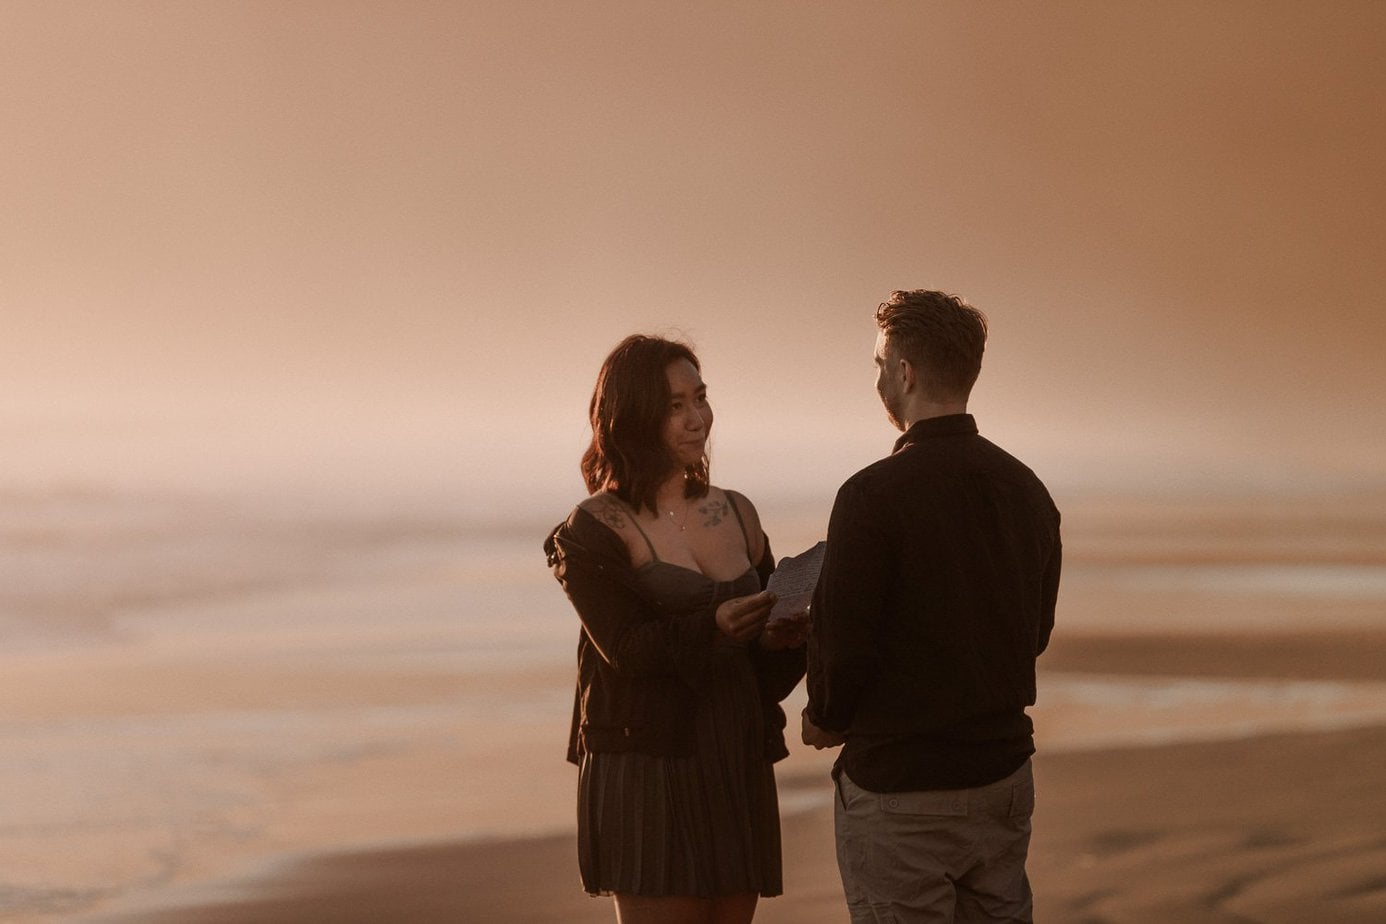 Sunset Oregon coast elopement where the ocean mist glows in the sunlight. Couple reads their handwritten vows to each other